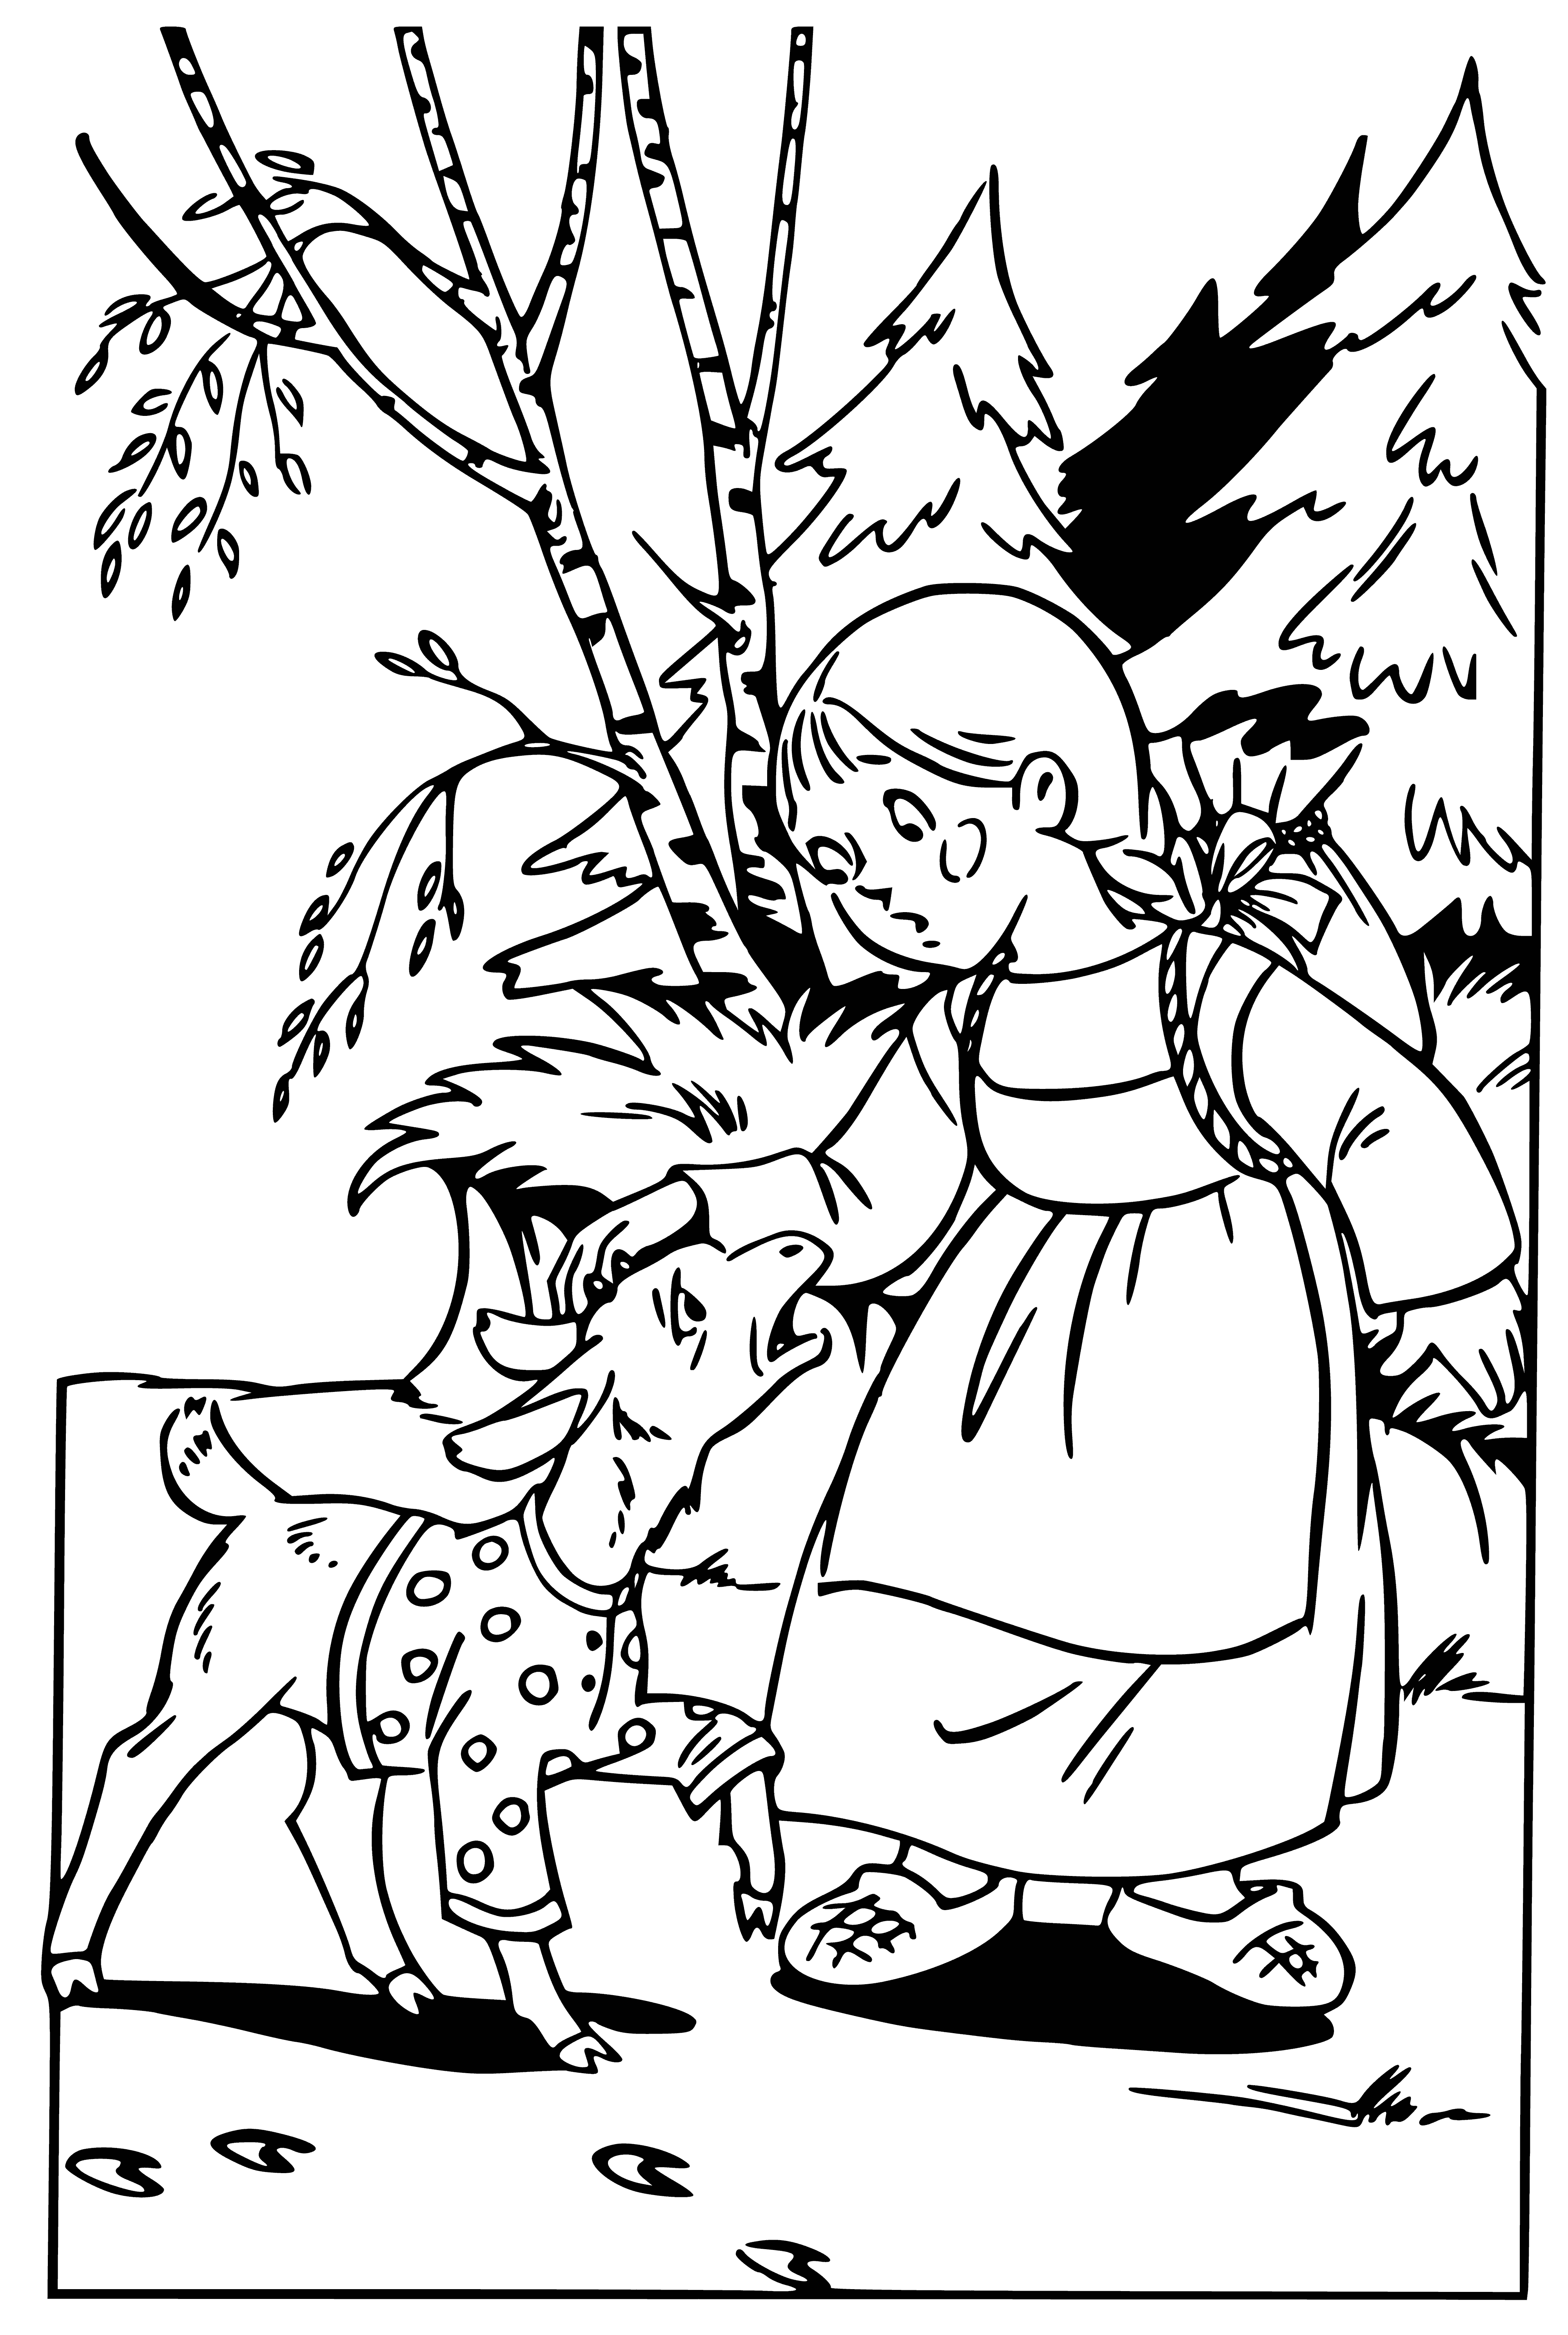 coloring page: Two siblings explore nature, hand-in-hand. They seem to be the only ones around.